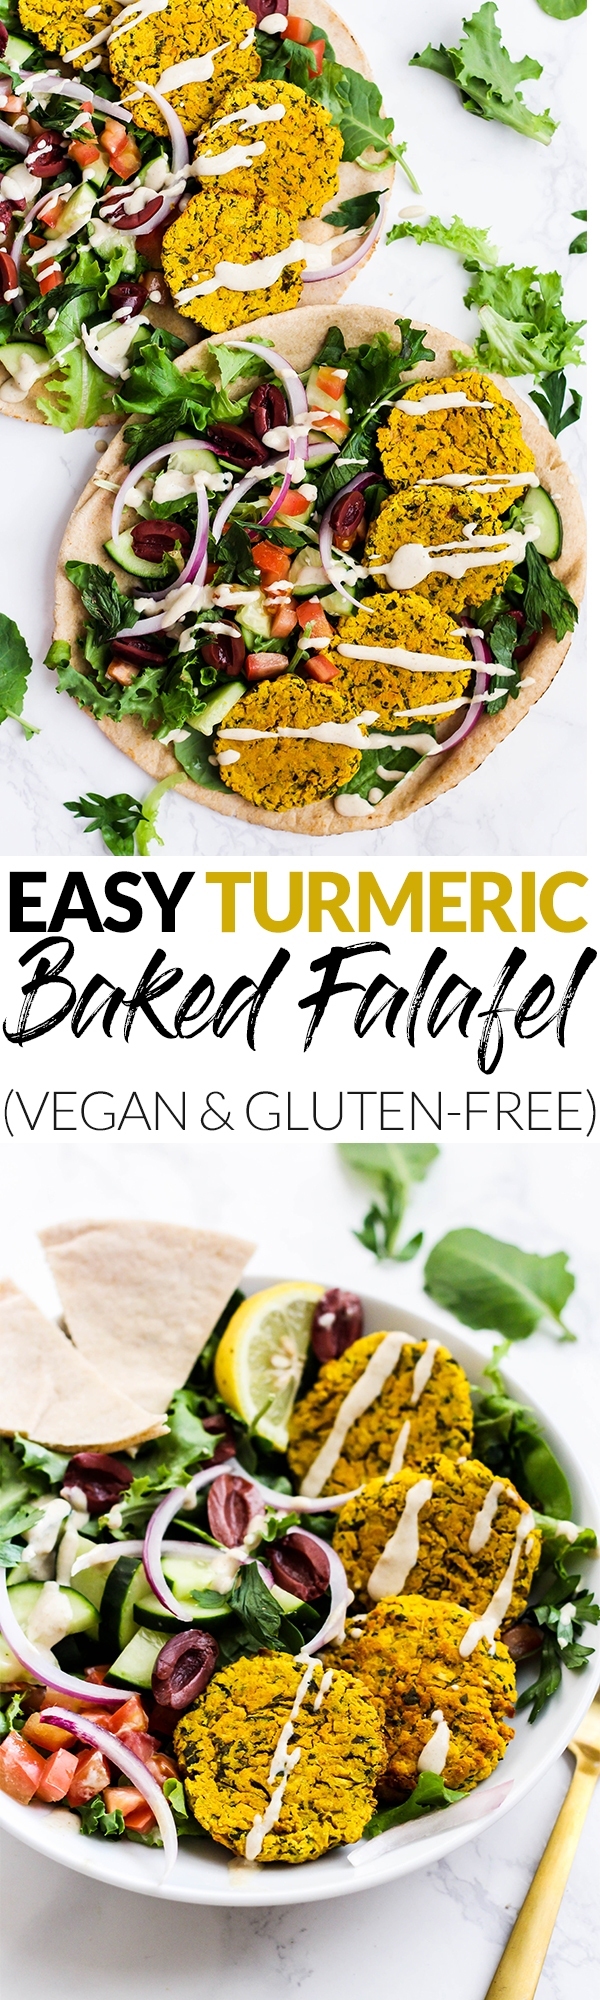 Add a pop of color to your Mediterranean dishes with this easy Turmeric Baked Falafel! The perfect addition to salad, bowls or pita sandwiches. Vegan & gluten-free!